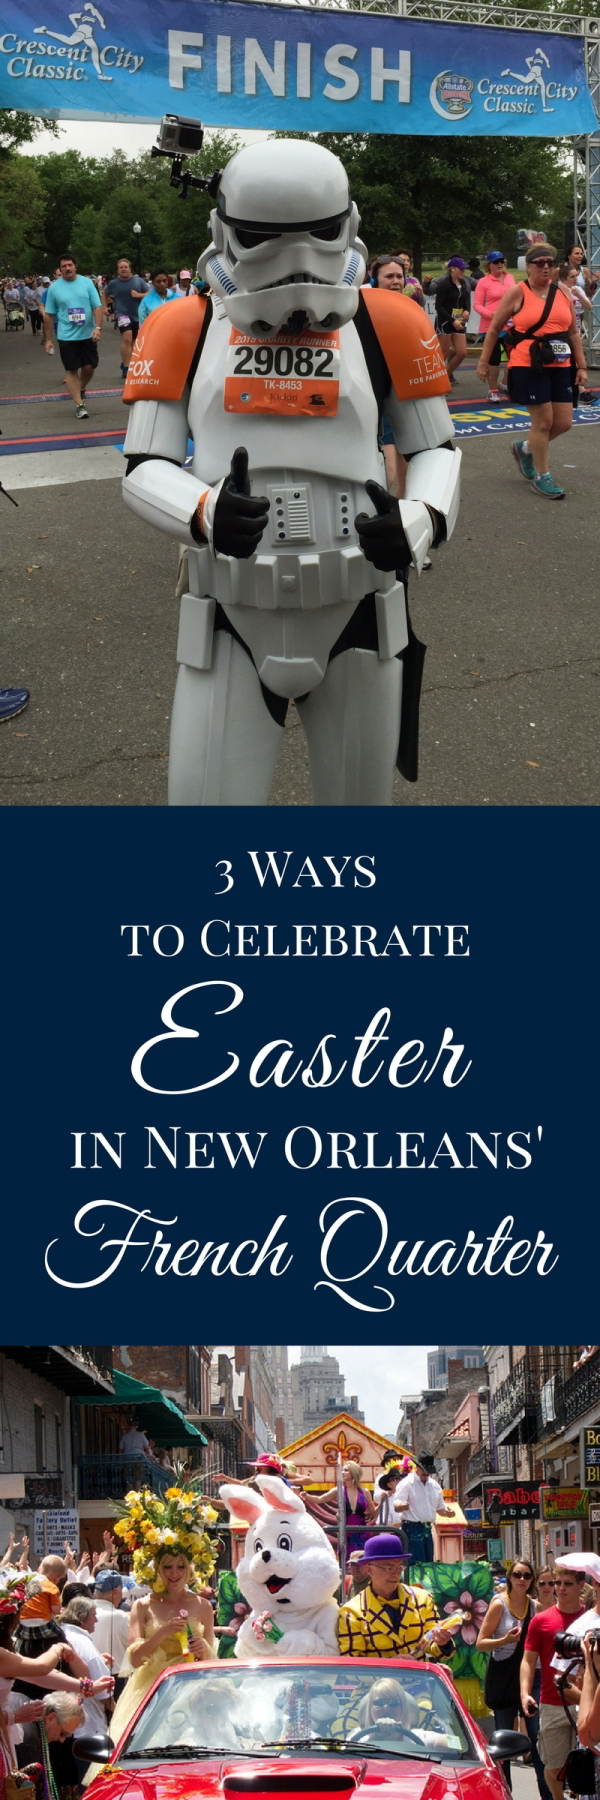 In New Orleans, we do things a little differently. Planning a visit? Here are 3 ways to celebrate Easter in New Orleans' French Quarter.